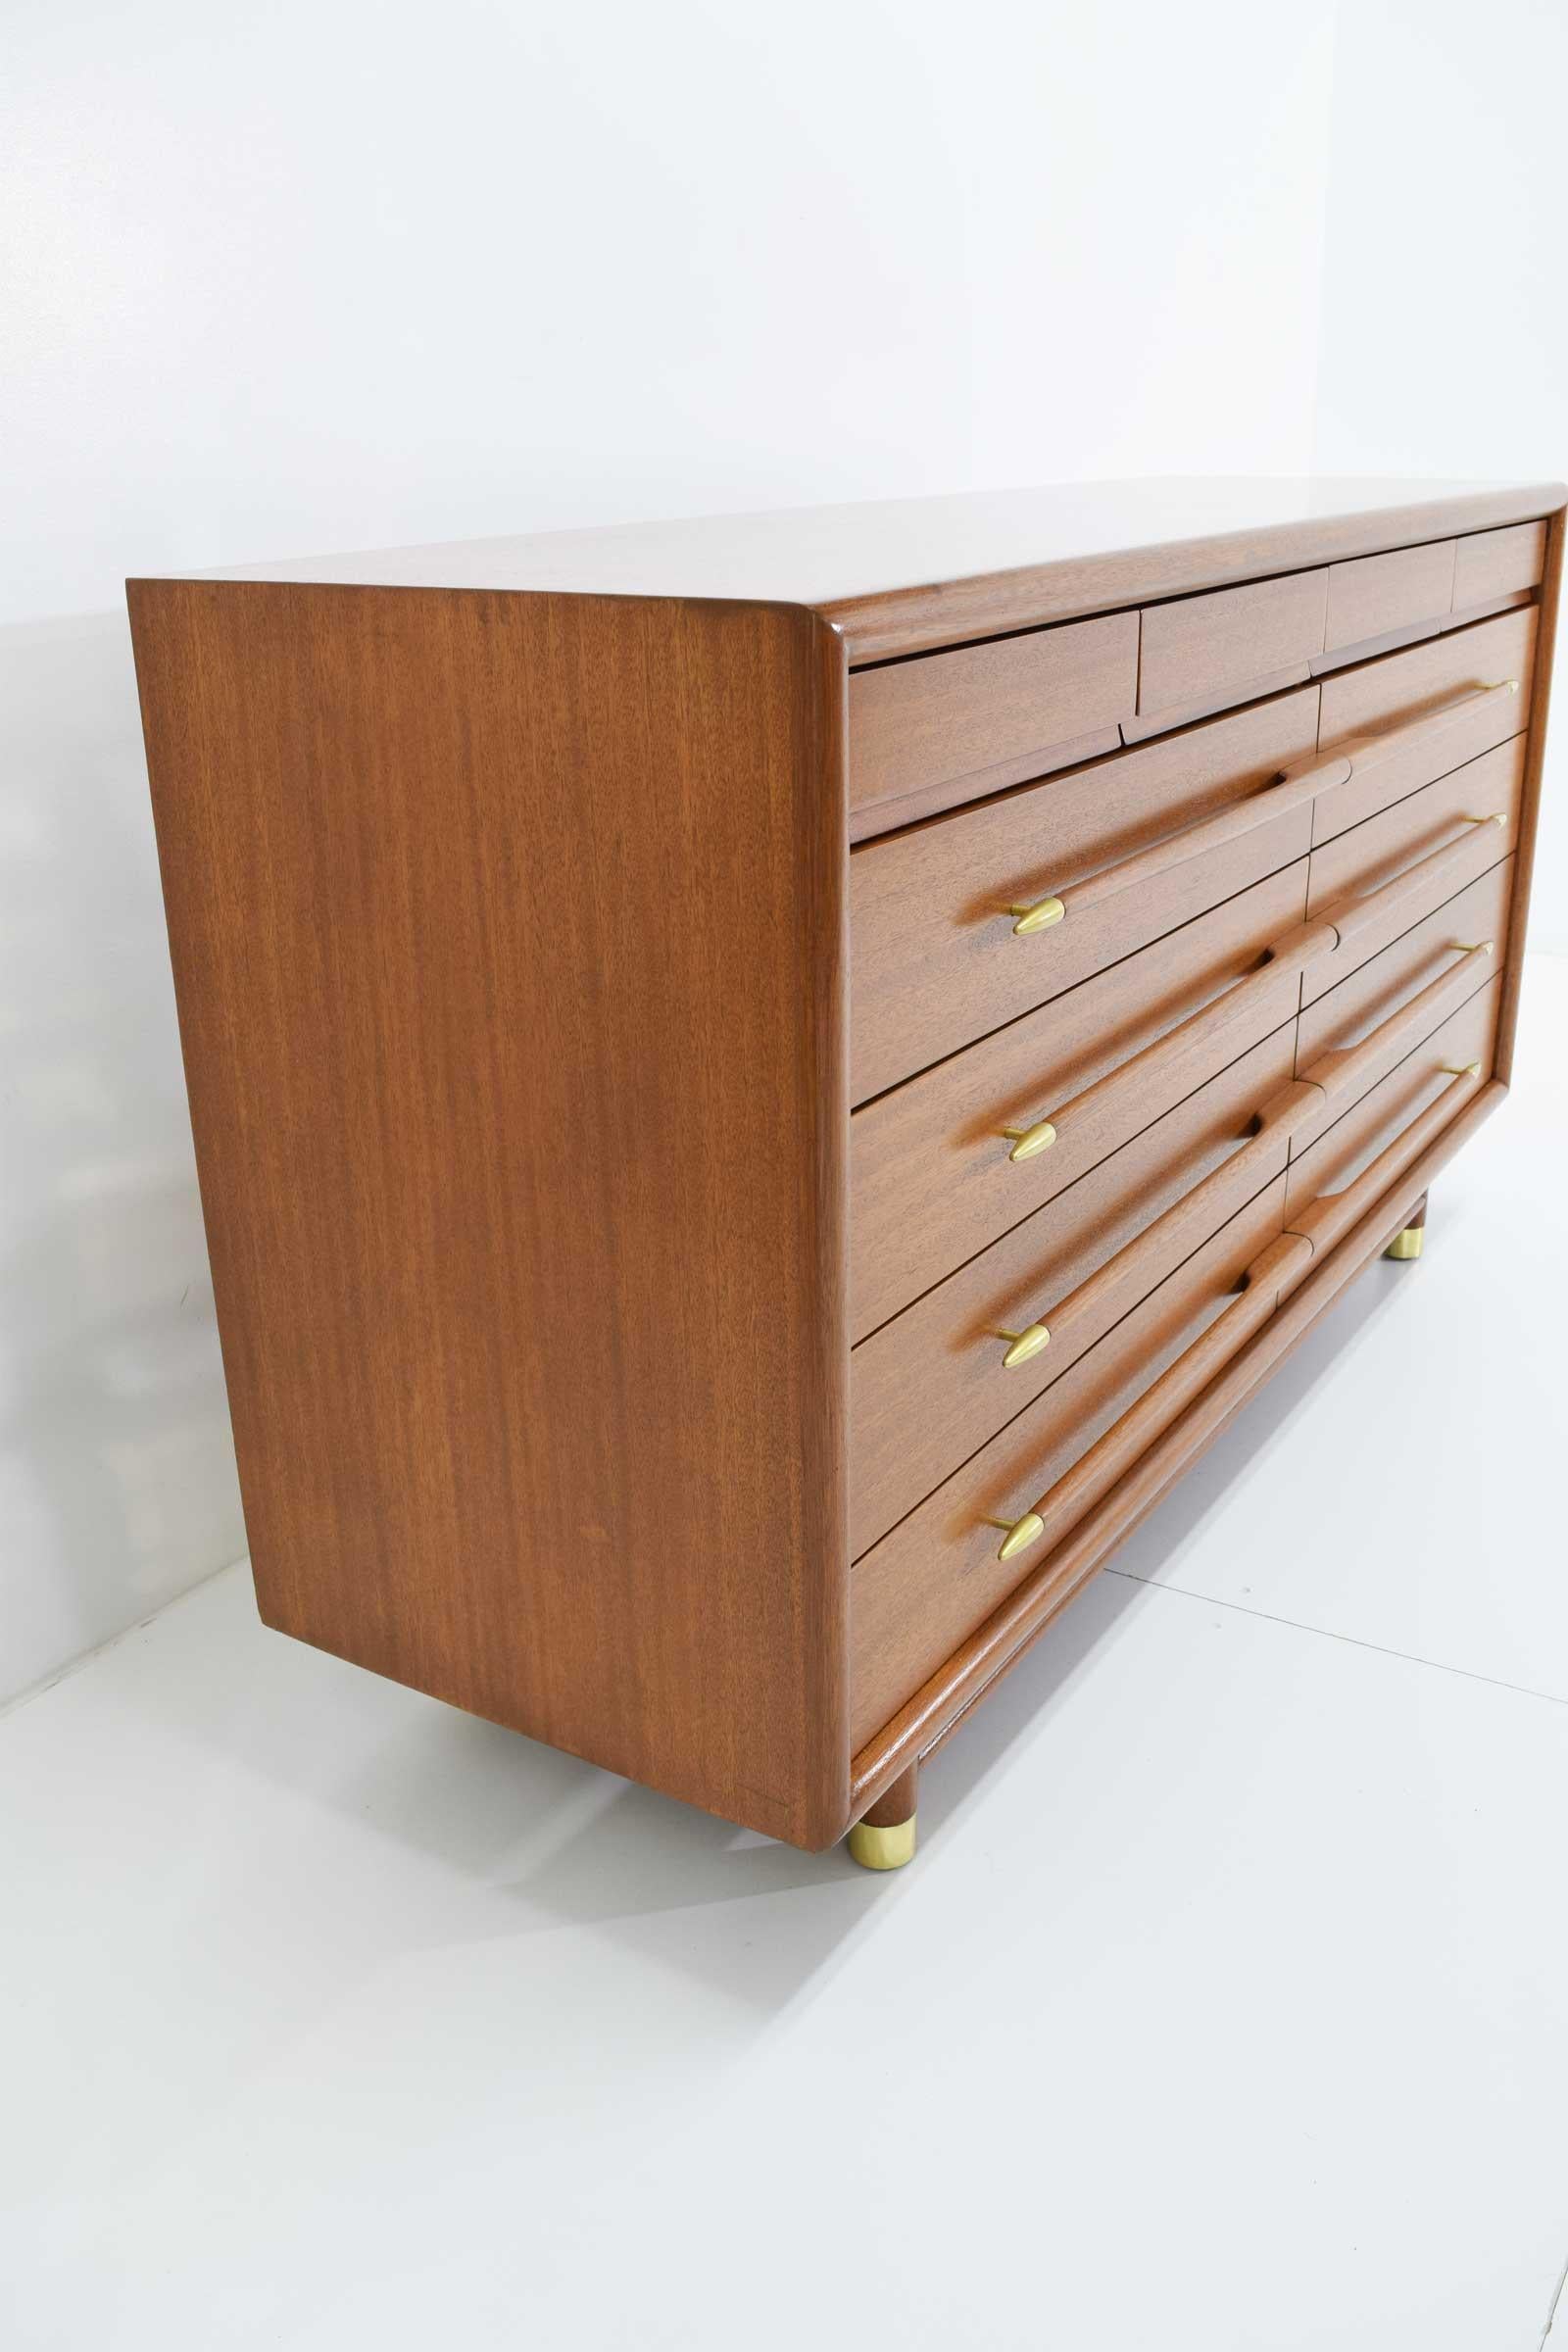 American John Keal Mr. & Mrs. Chest of Drawers in Walnut with Brass Sabots, 1950s